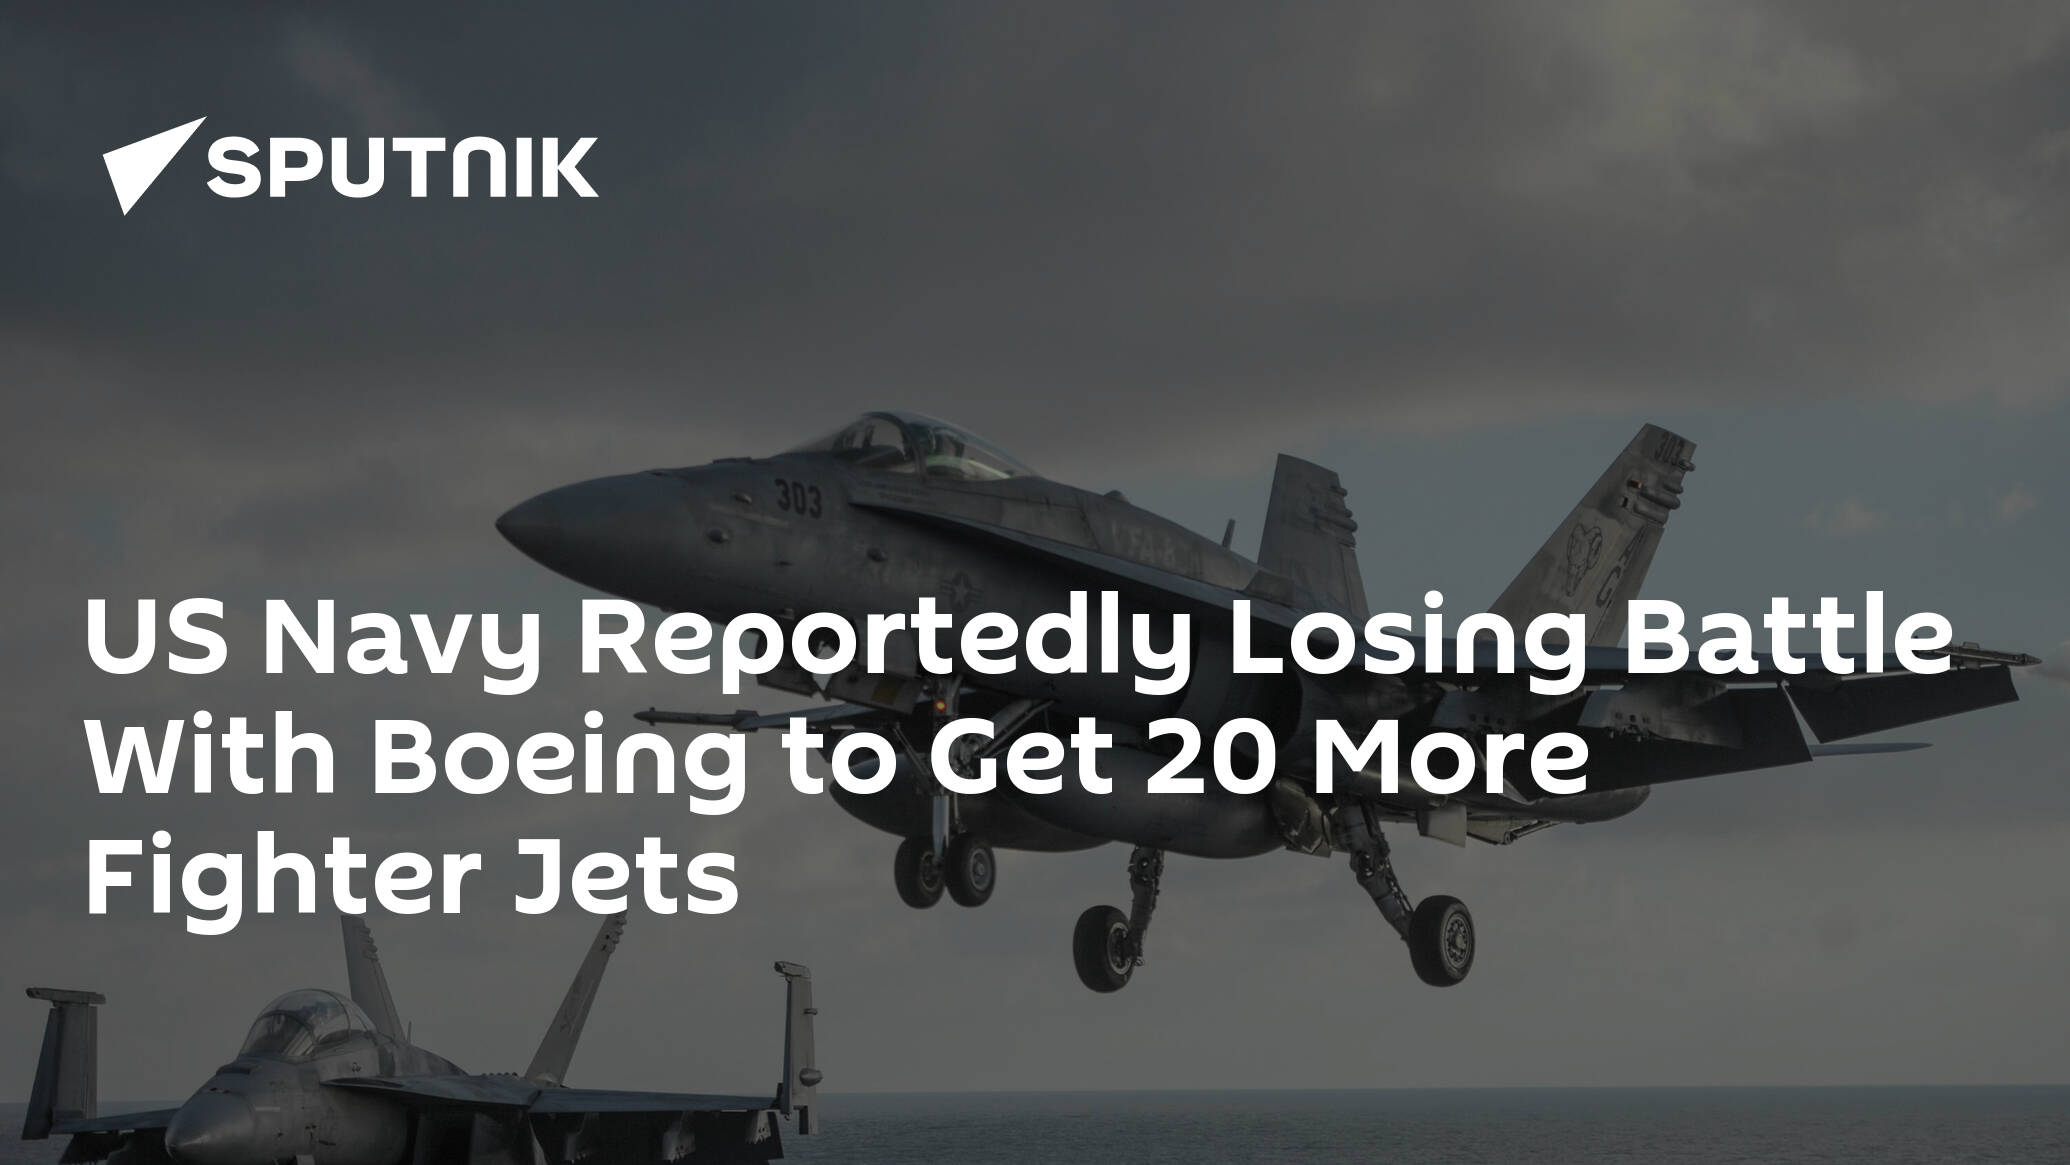 US Navy Reportedly Losing Battle With Boeing to Get 20 More Fighter Jets